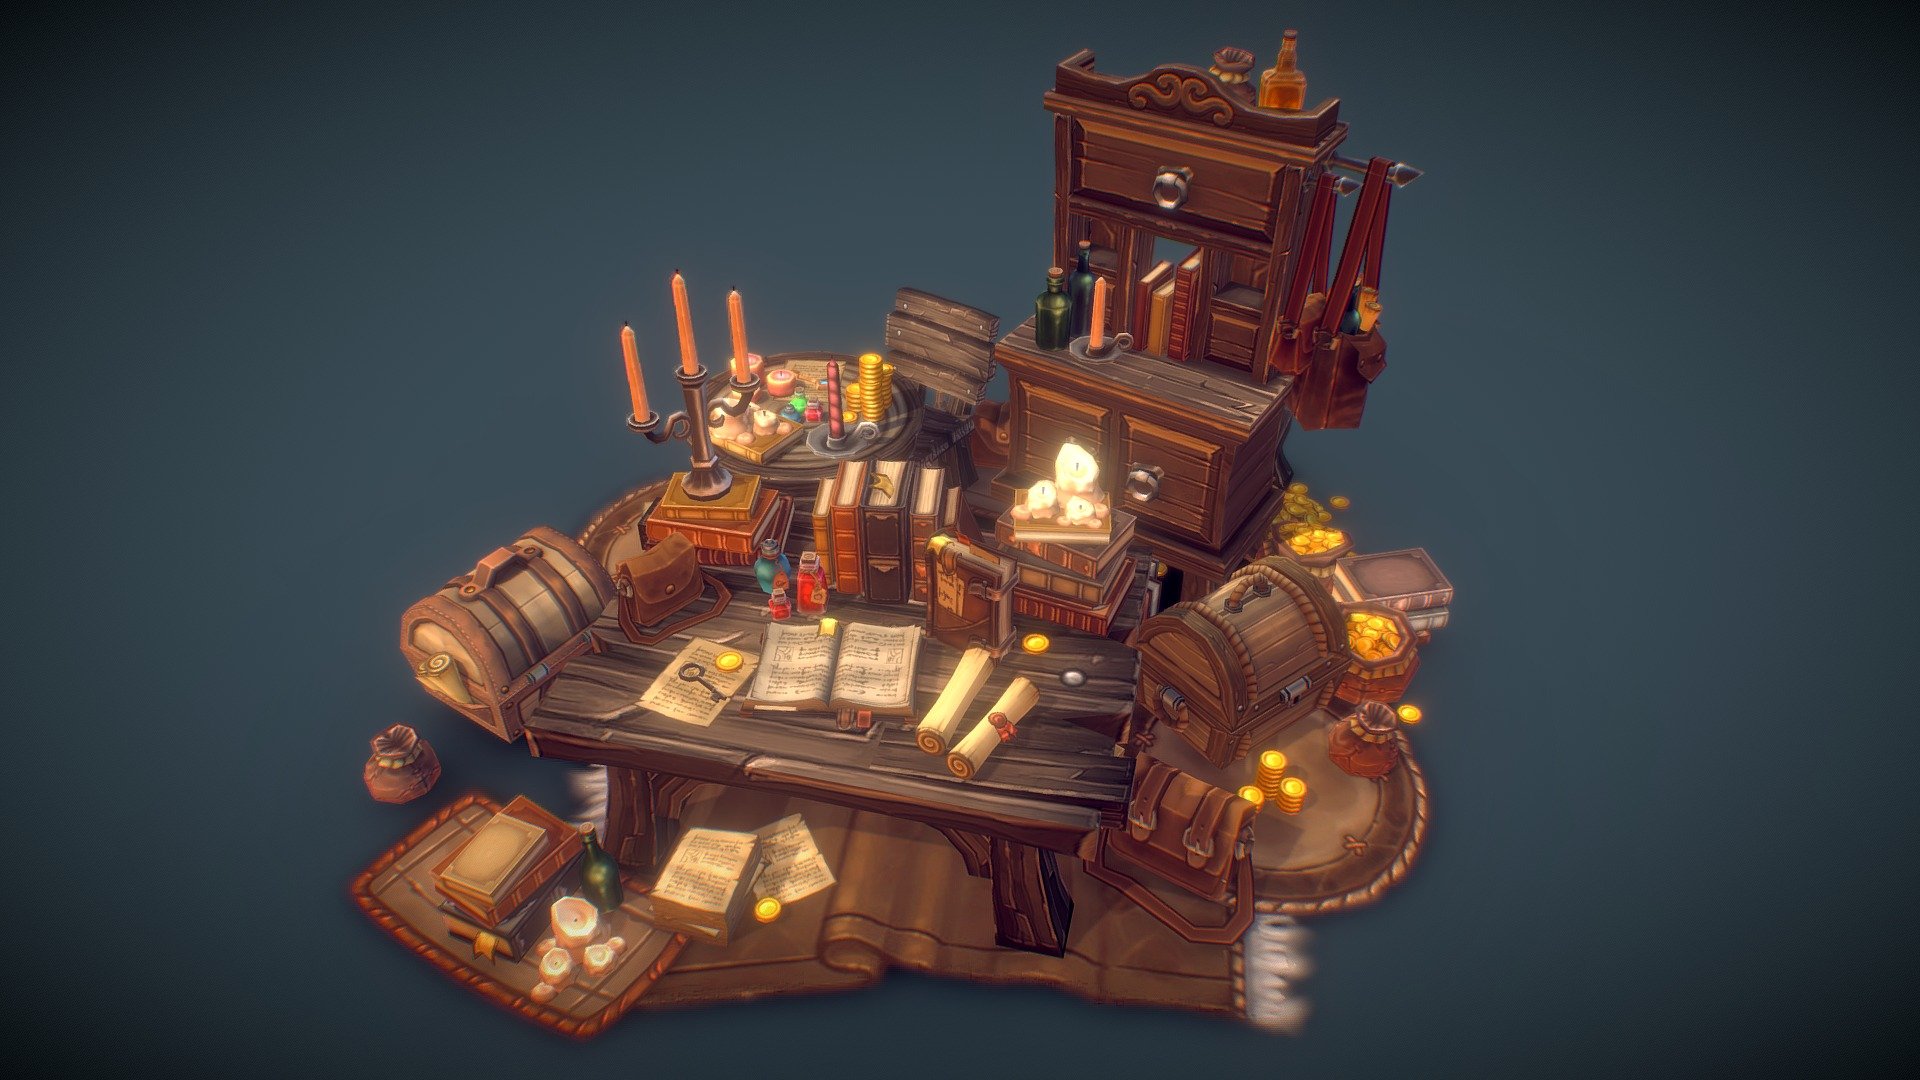 This work is a props and loot set modeled and masterfully painted by Antonio Neves. It has been uploaded by me here for presentation purposes as we are hosting this extraordinary set for him on the BitGem store 3d model